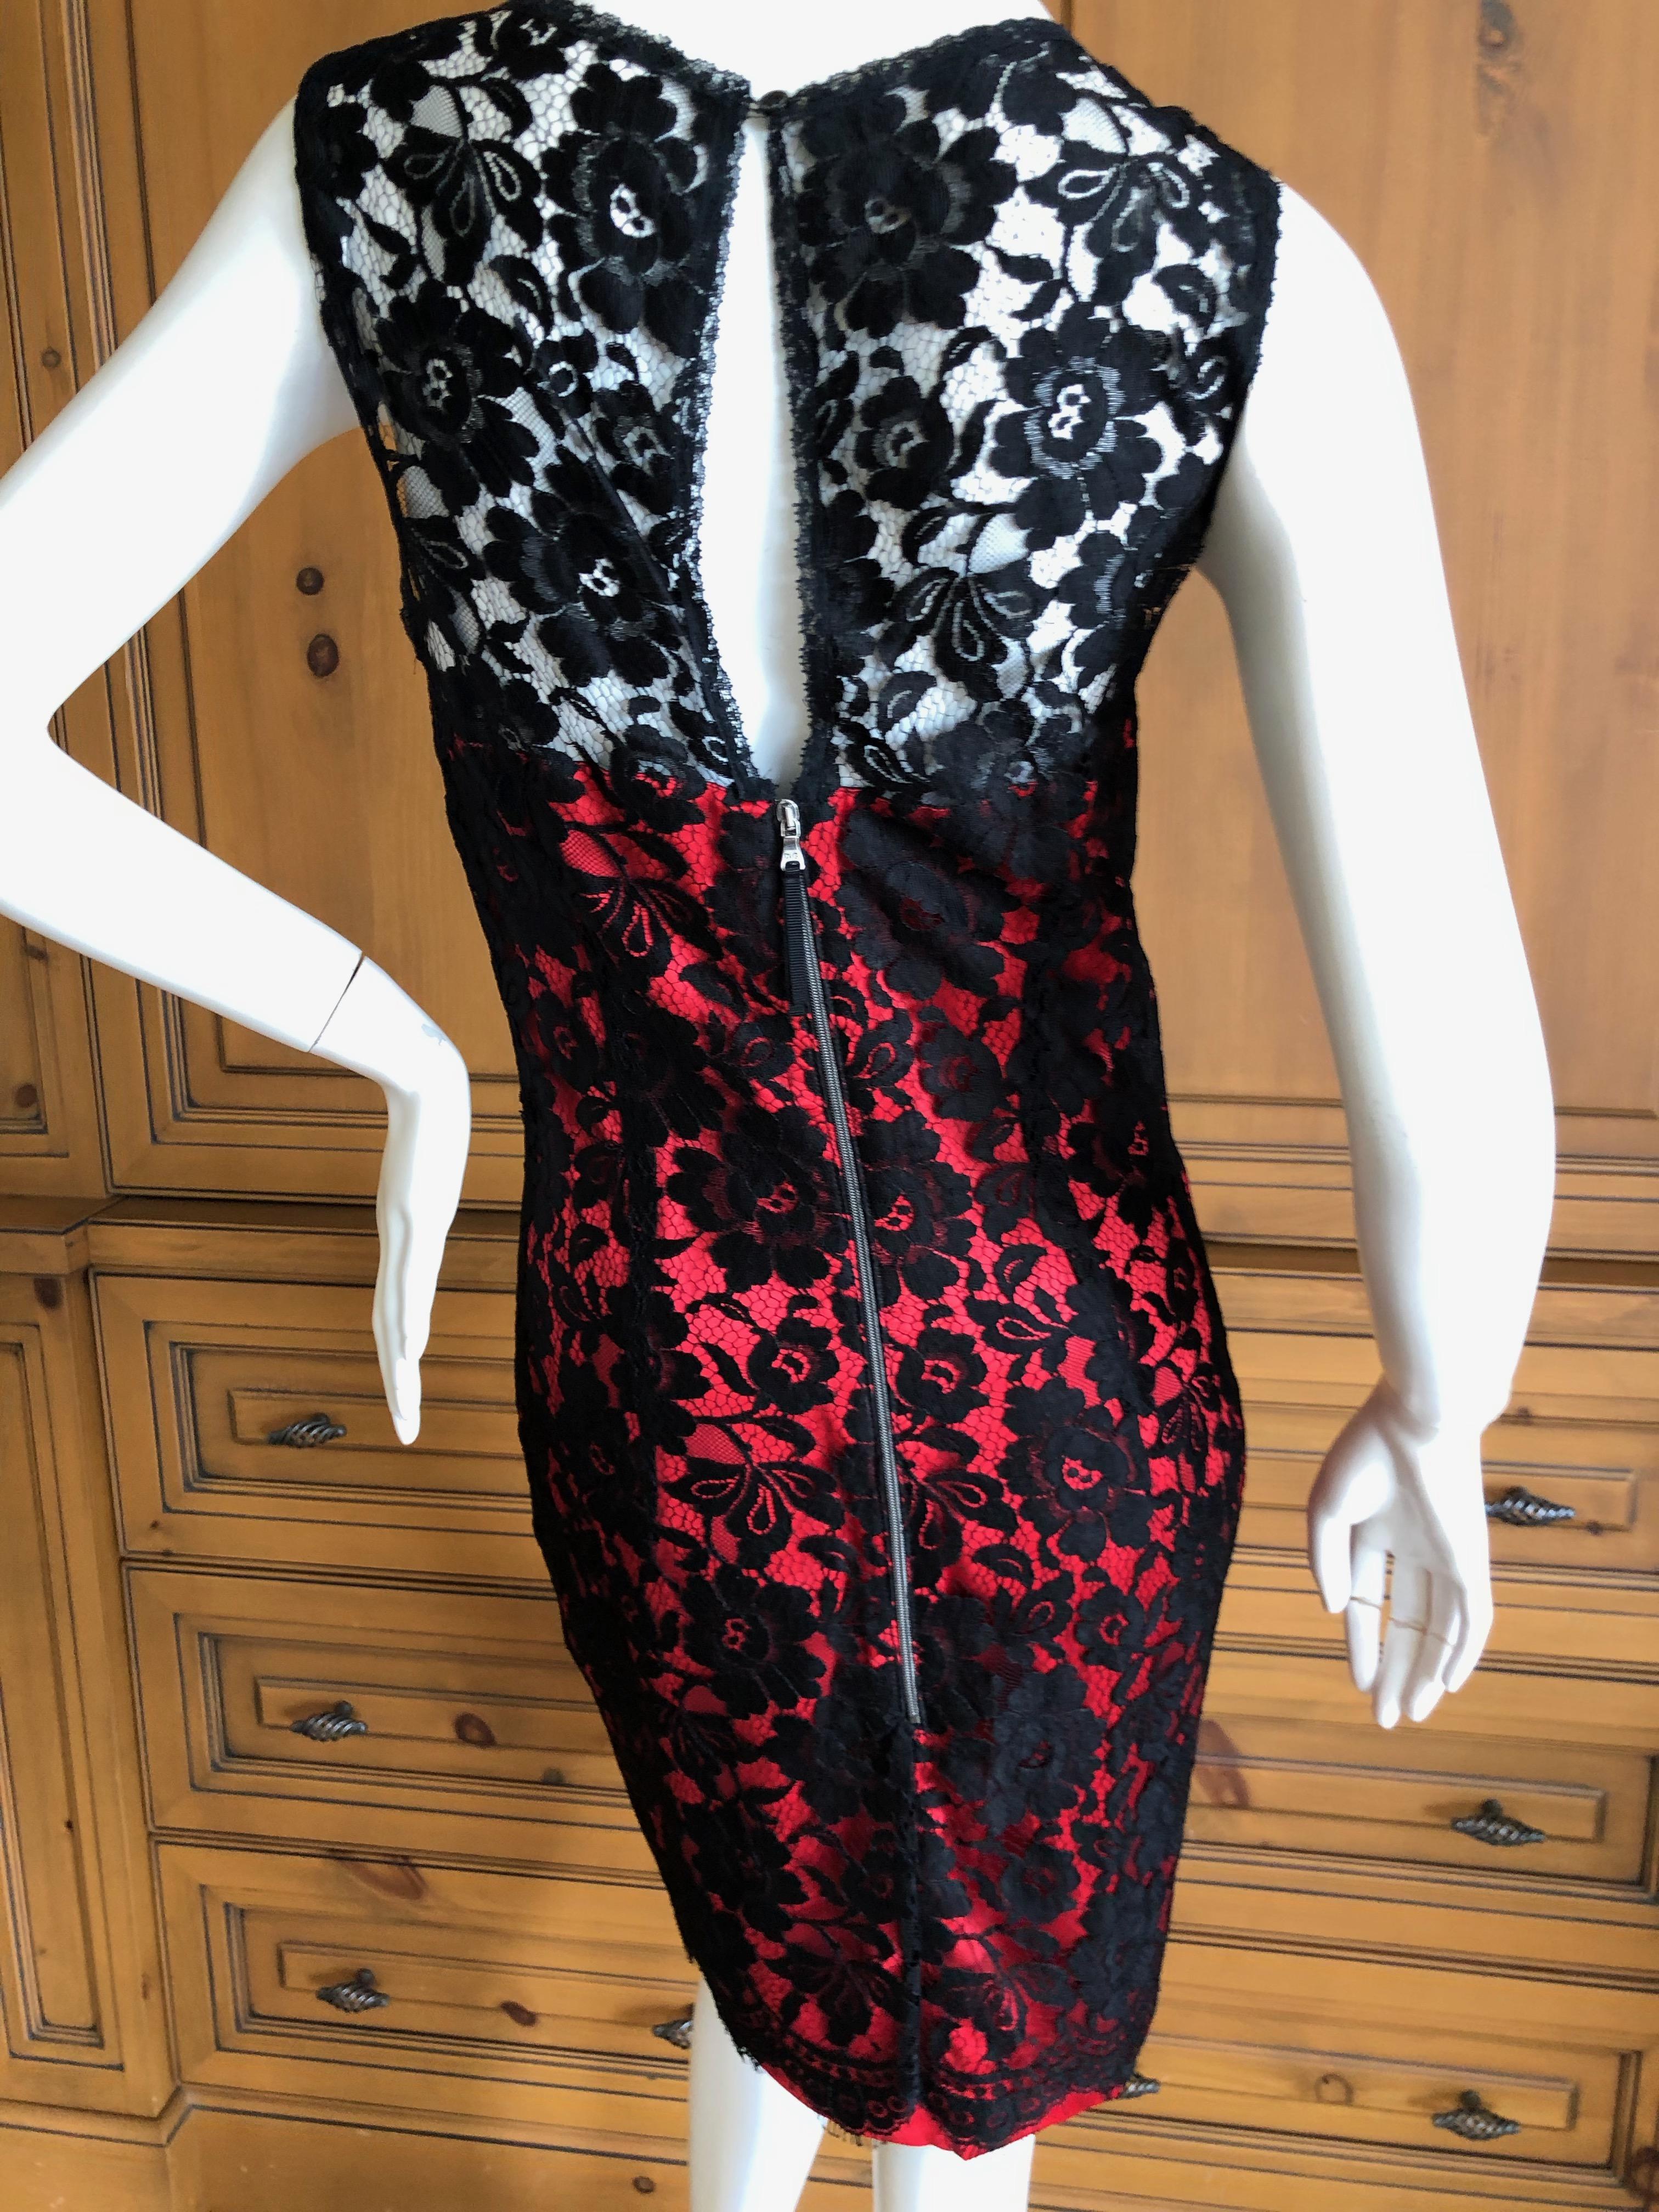 black dress with red lace overlay